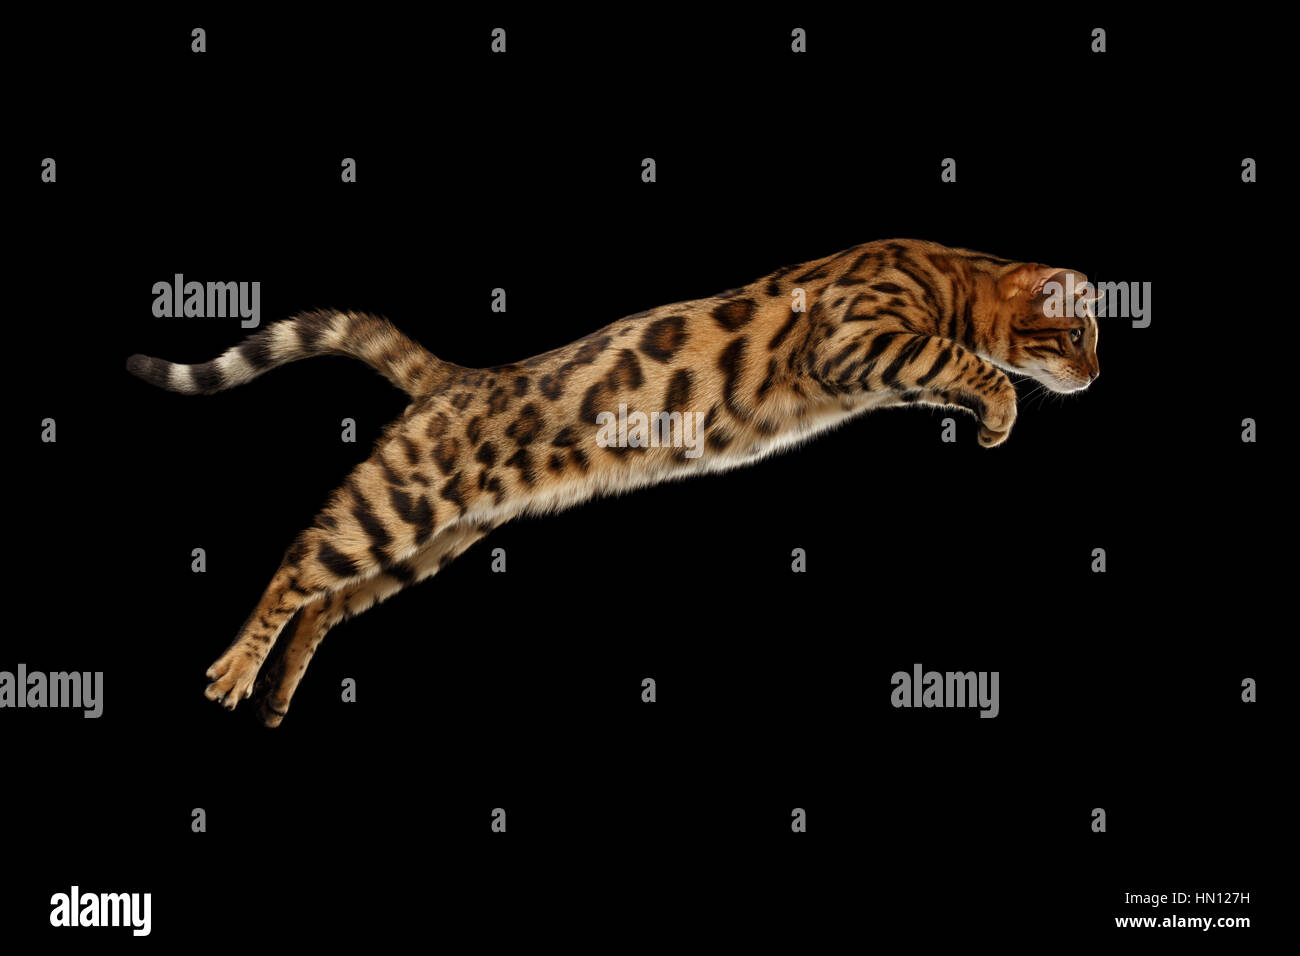 Jumping Bengal Cat on Black Isolated Background Stock Photo